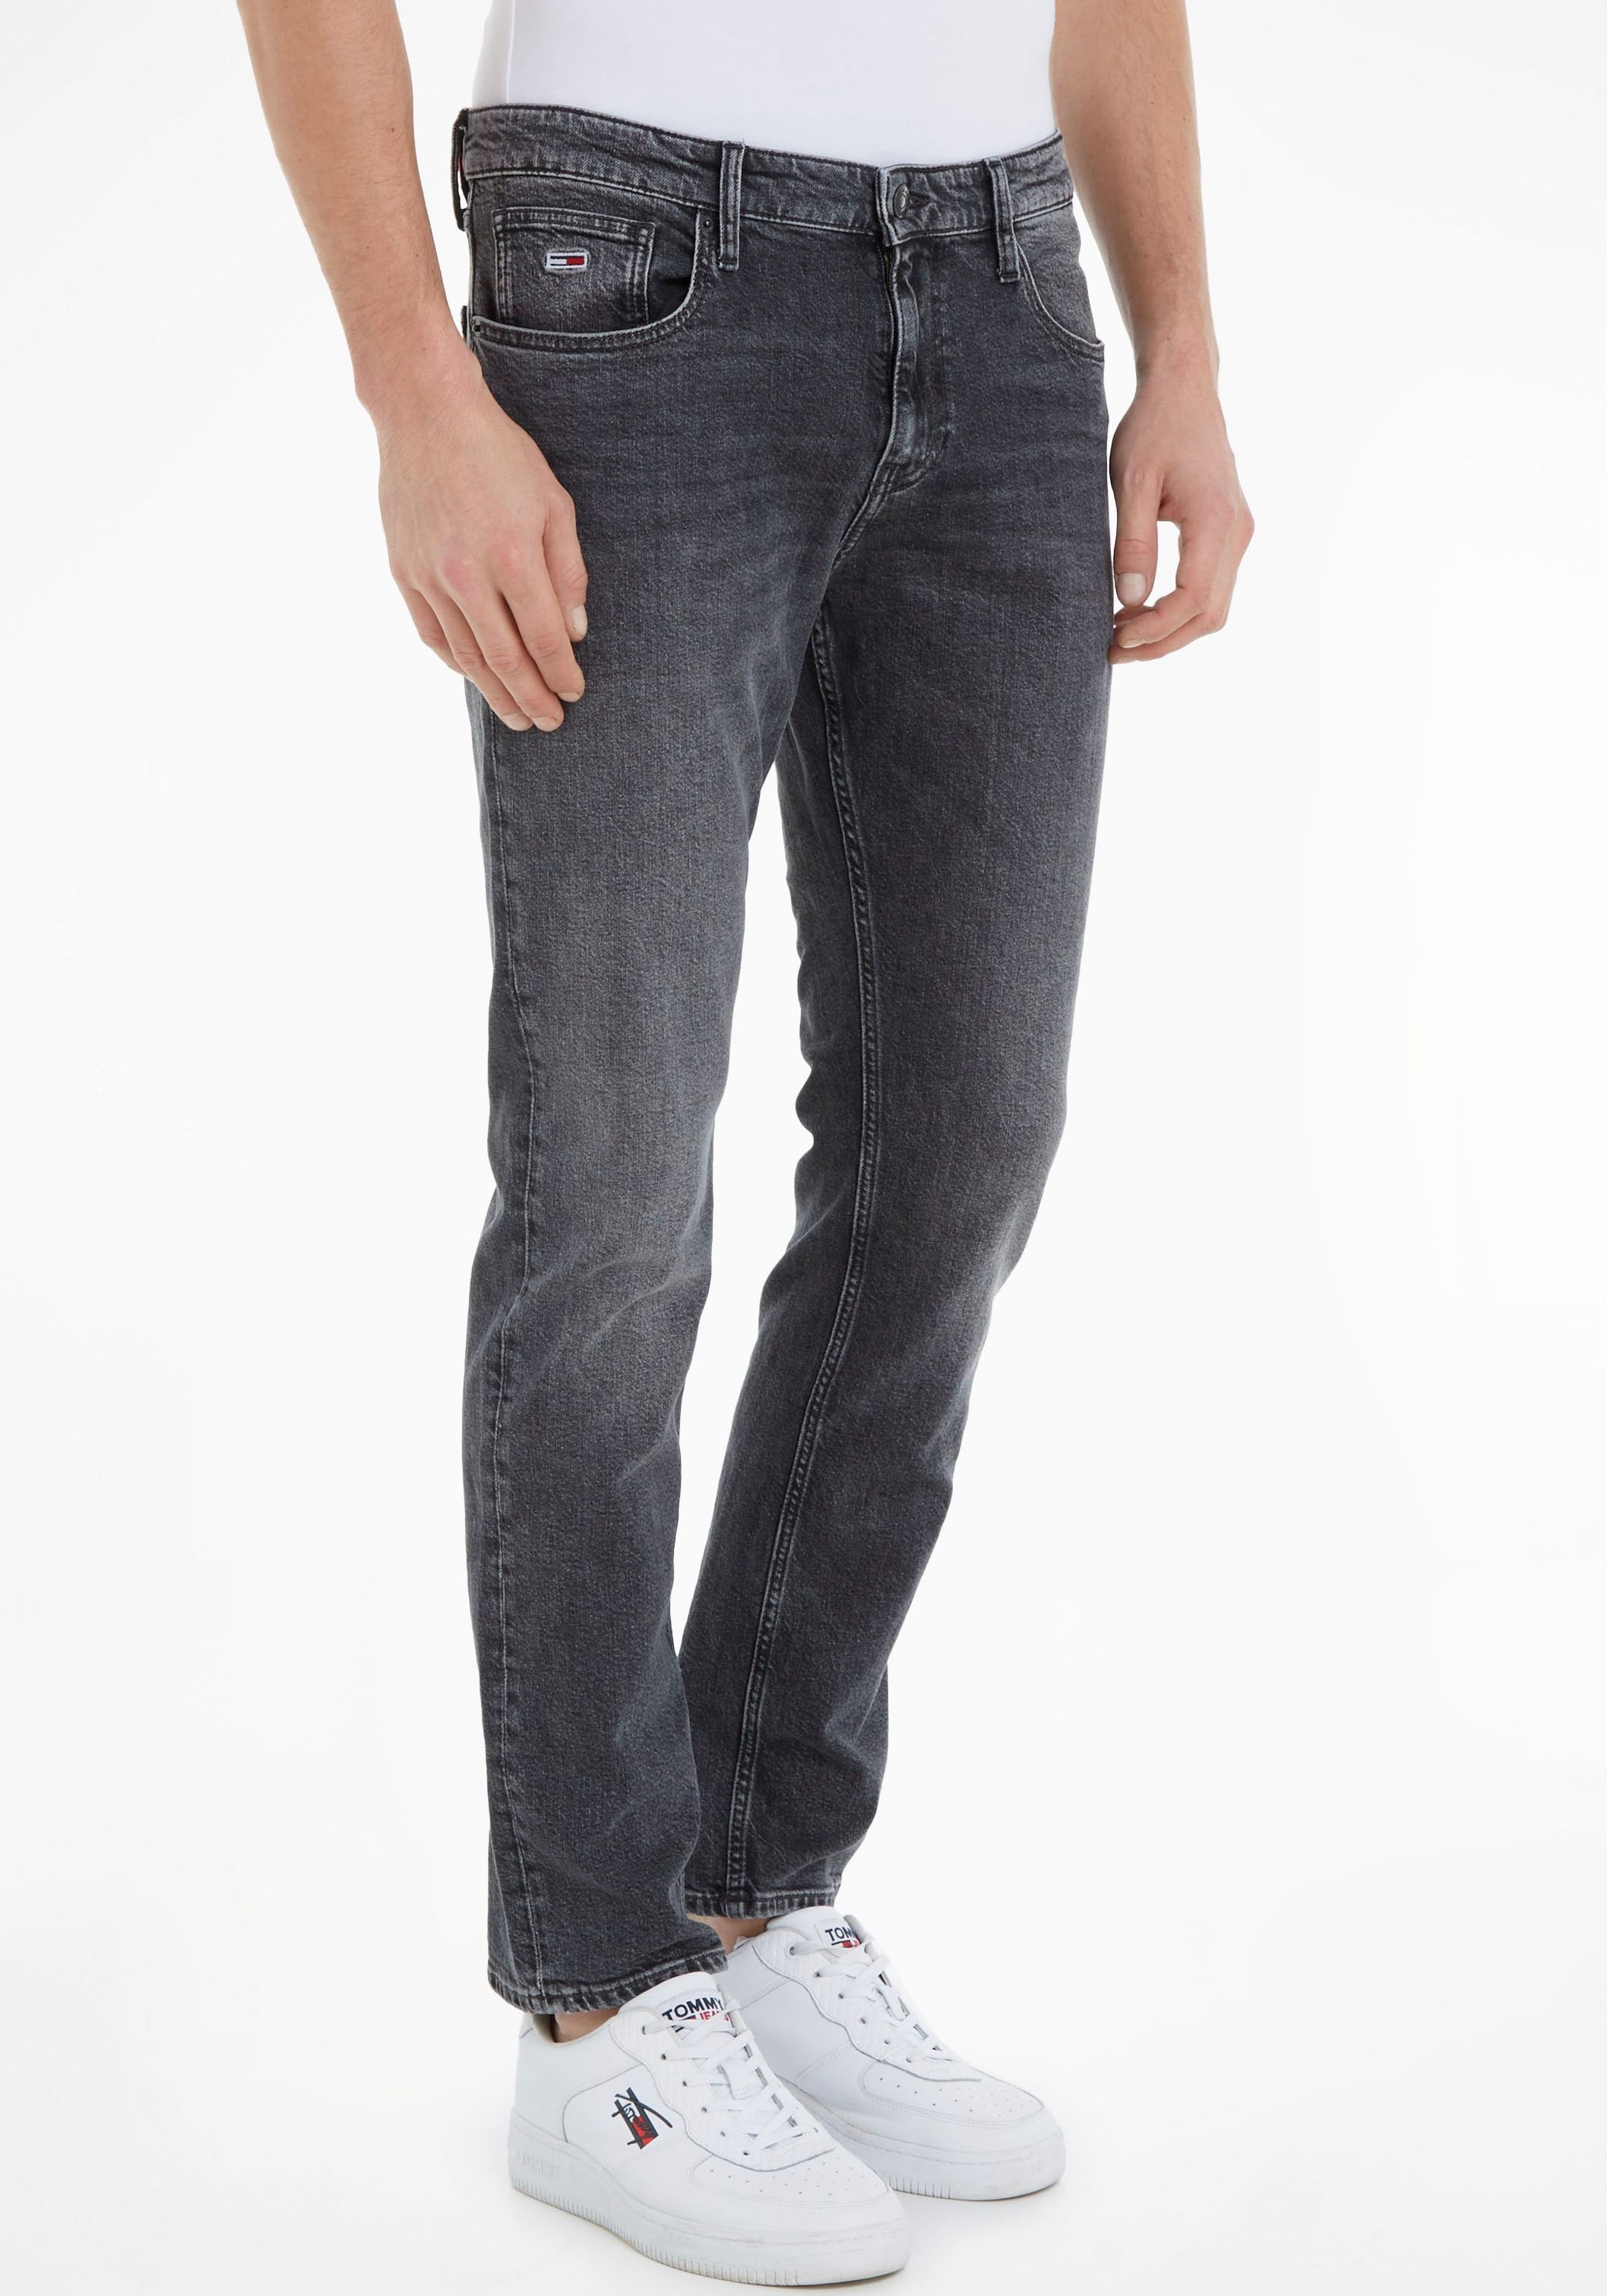 Tommy Jeans 5-Pocket-Jeans »RYAN RGLR bei online OTTO kaufen STRGHT«